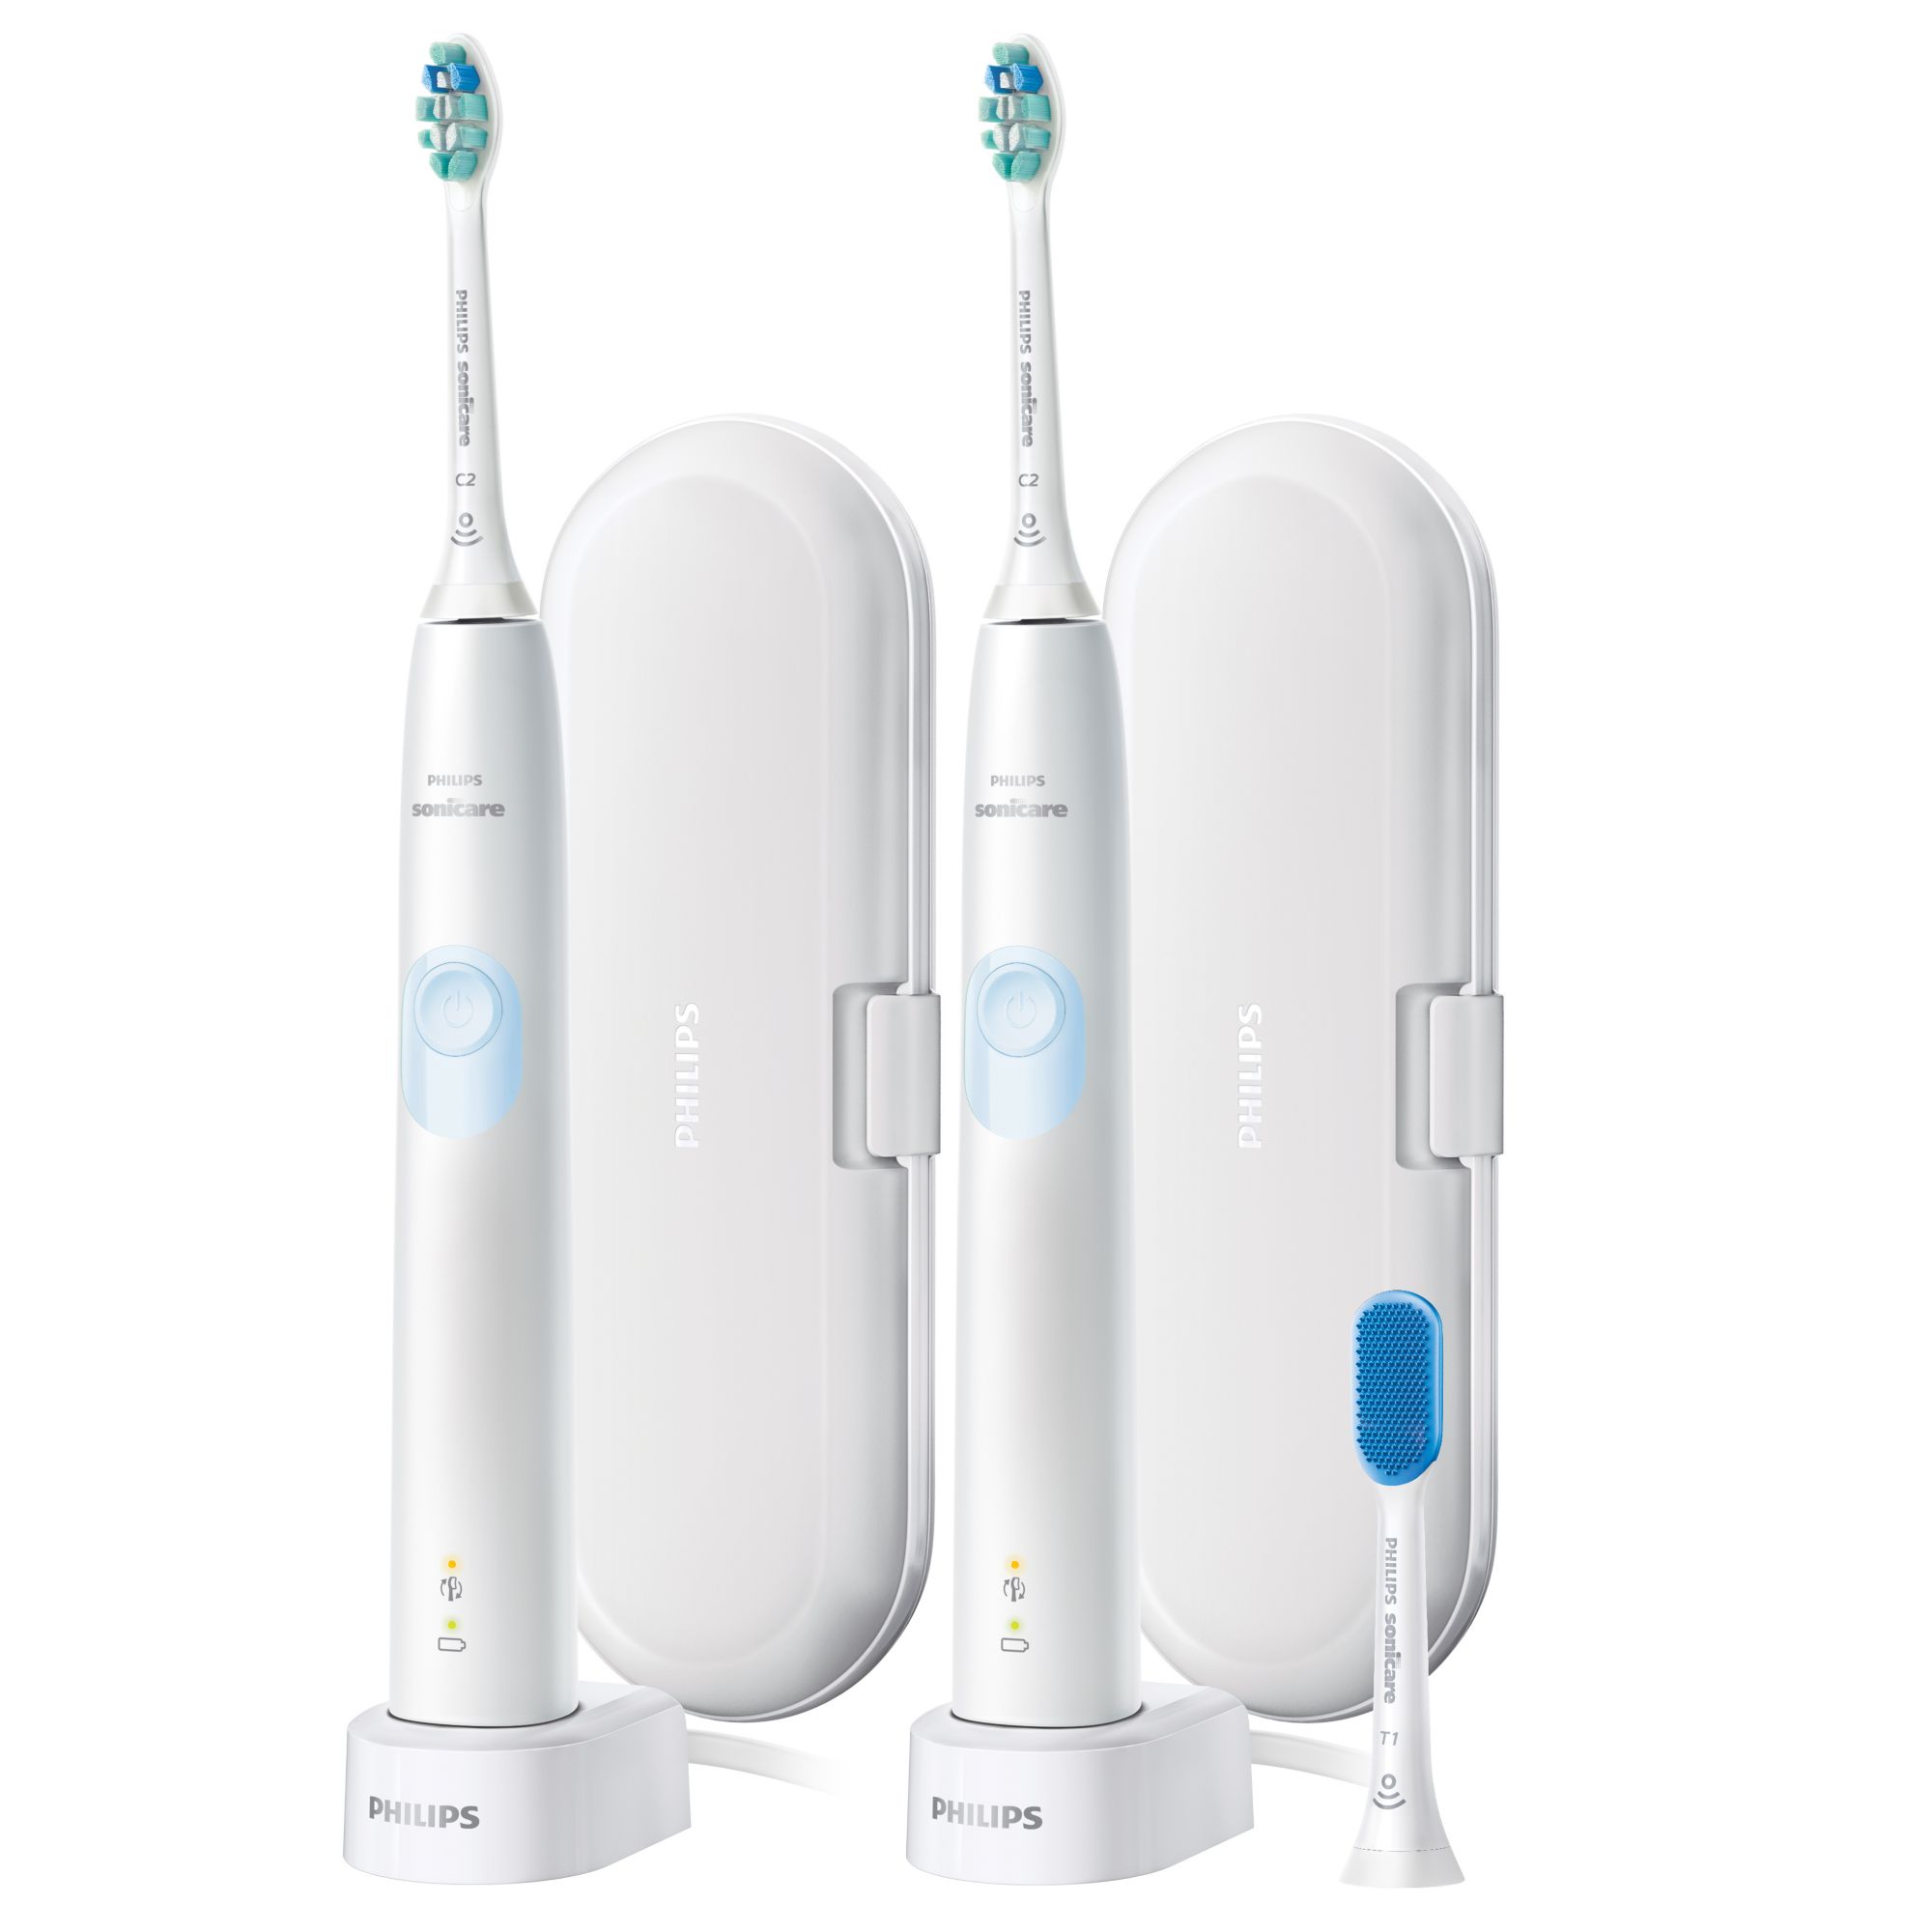 Philips Sonicare Protective Clean 4300 Plaque Control Rechargeable Toothbrush Bundle, 9-pc.